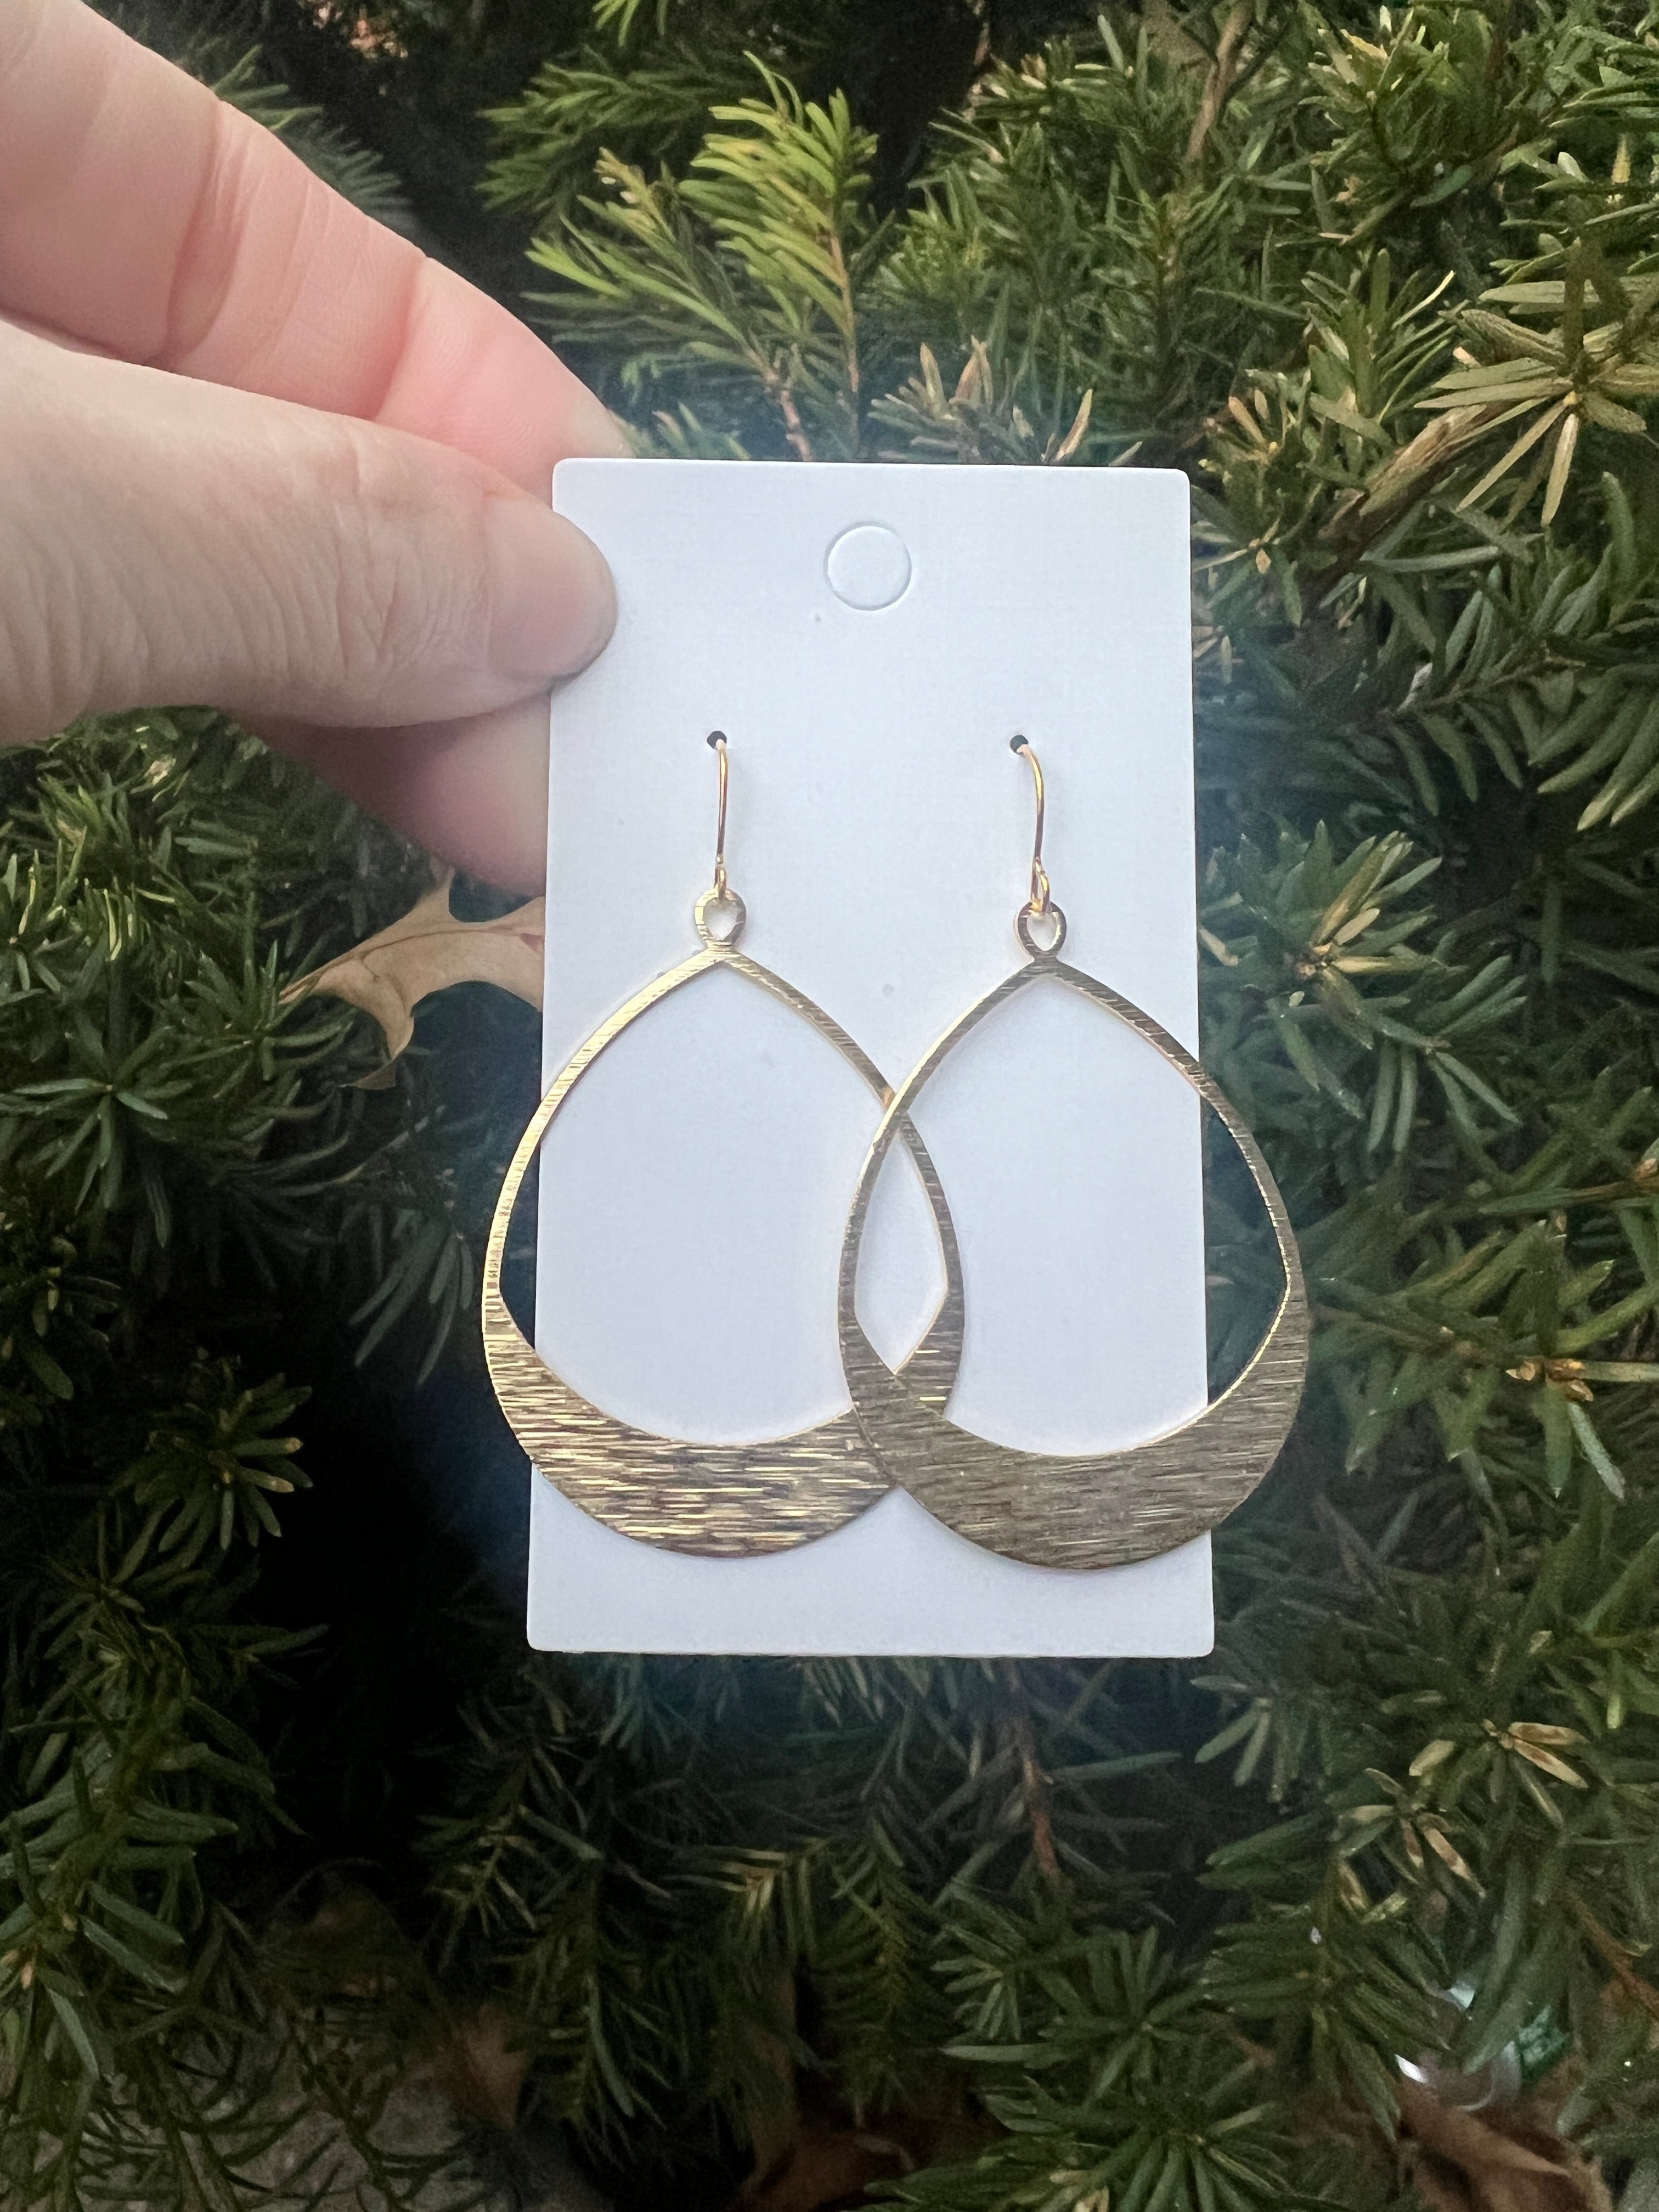 Brushed Gold Oval Metal Earrings